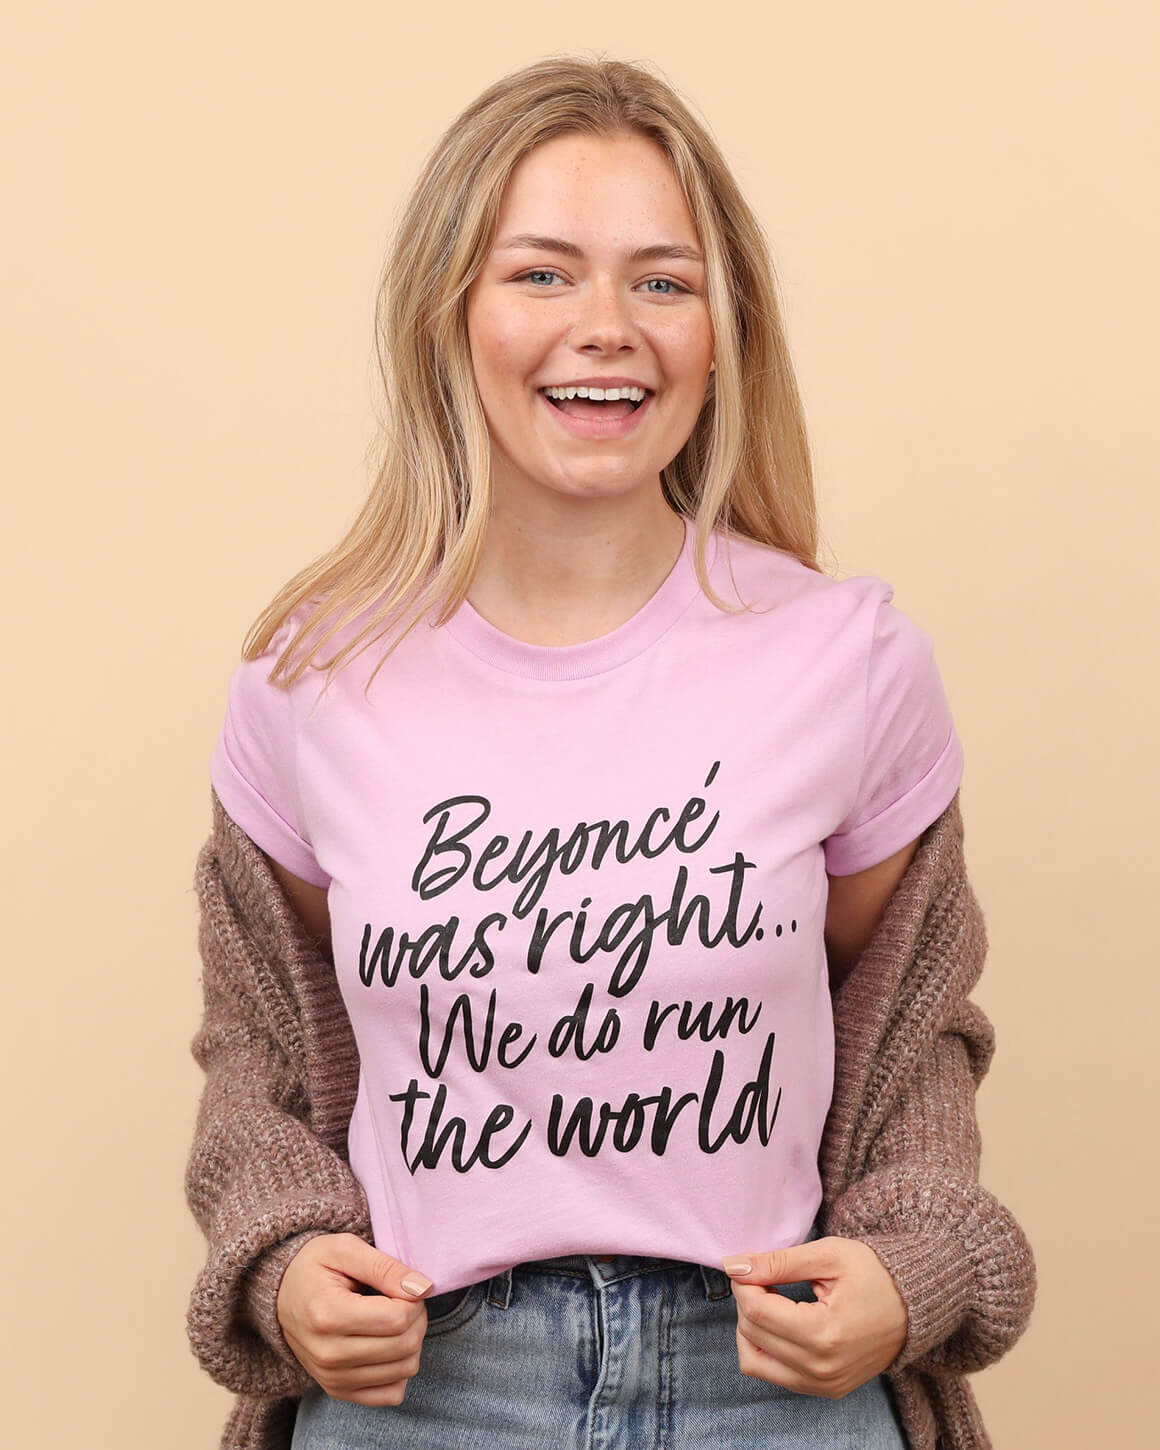 Smiling young woman wearing a pink feminist t-shirt